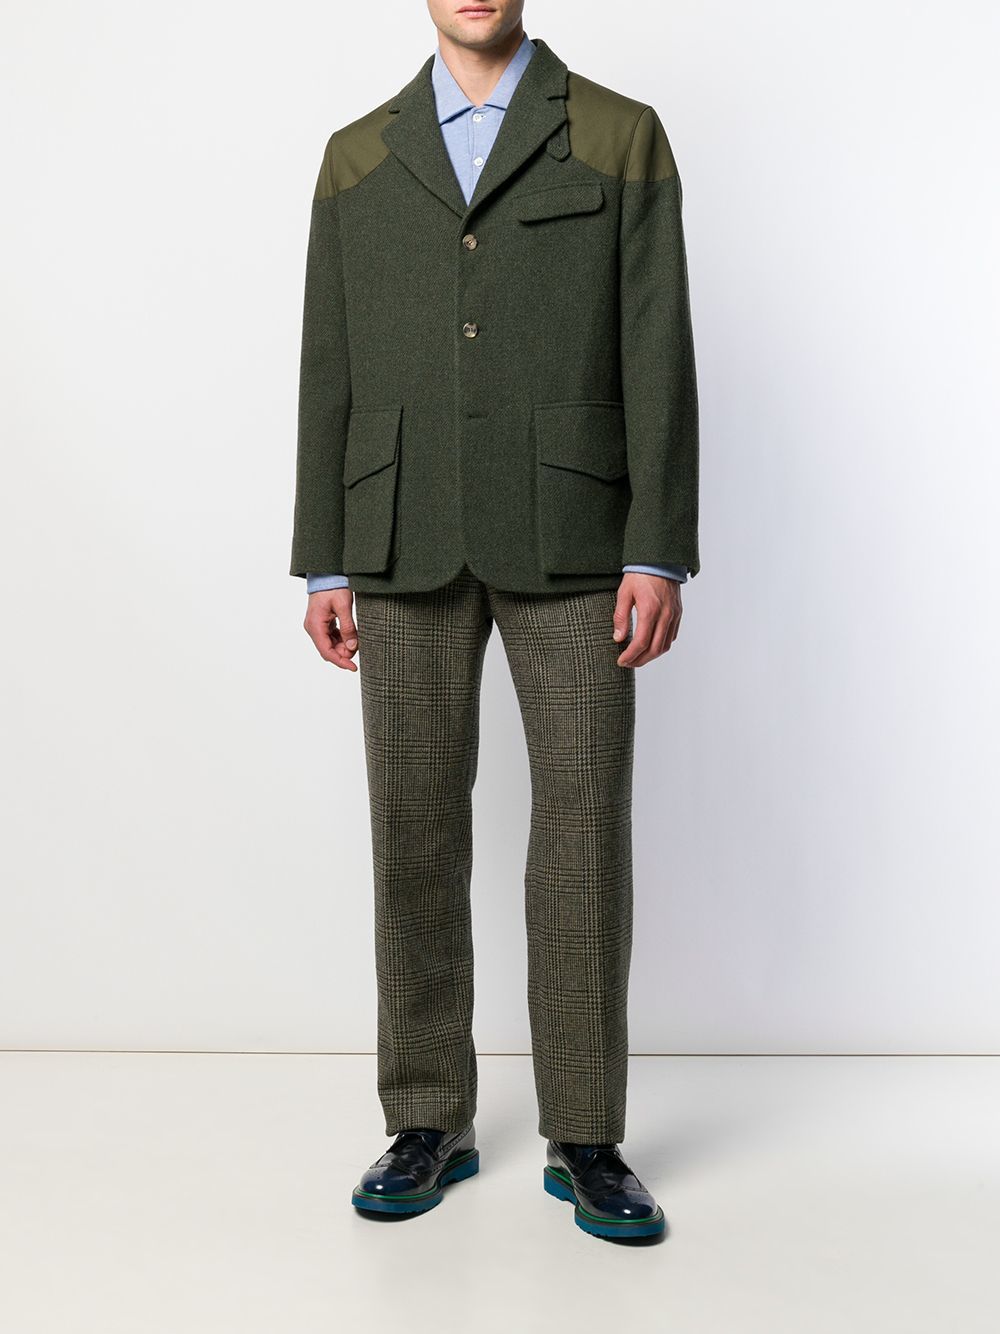 Holland & Holland Four Button Jacket With Patches, $725 | farfetch.com ...